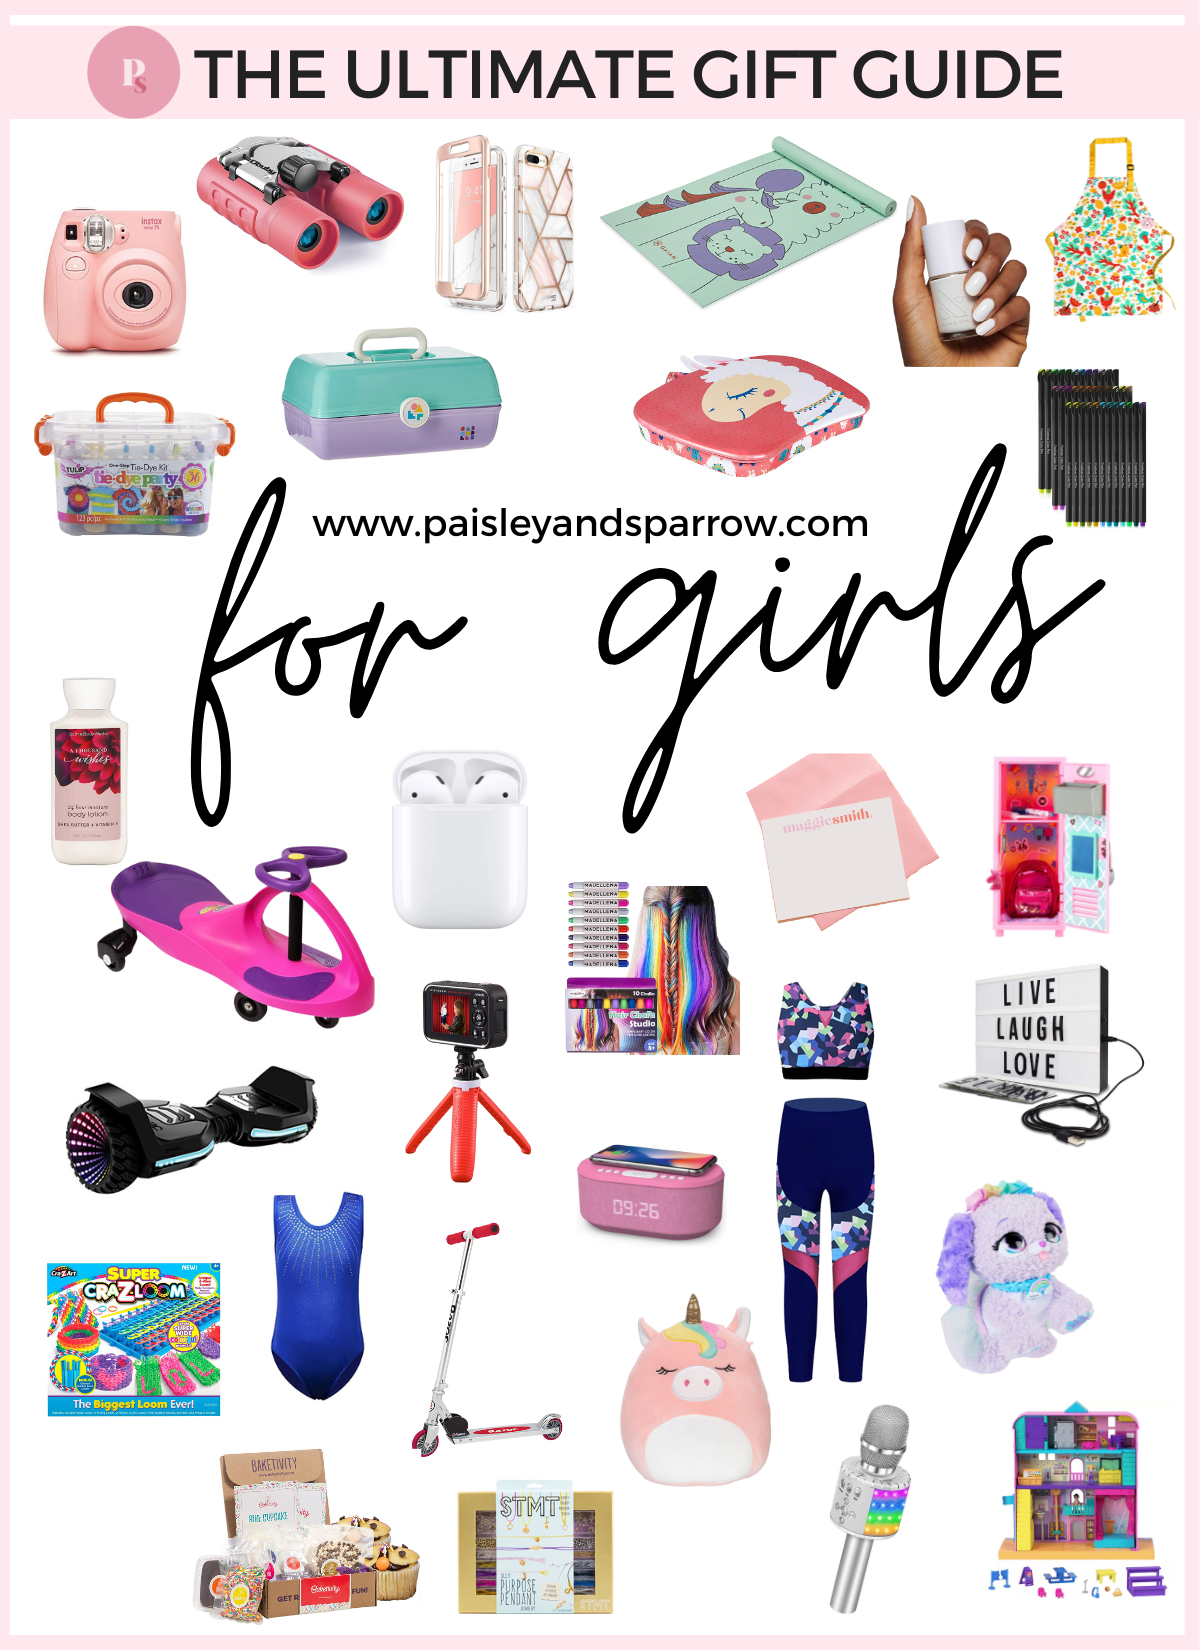 43 Perfect Gift Ideas for Girls (2022) Paisley & Sparrow